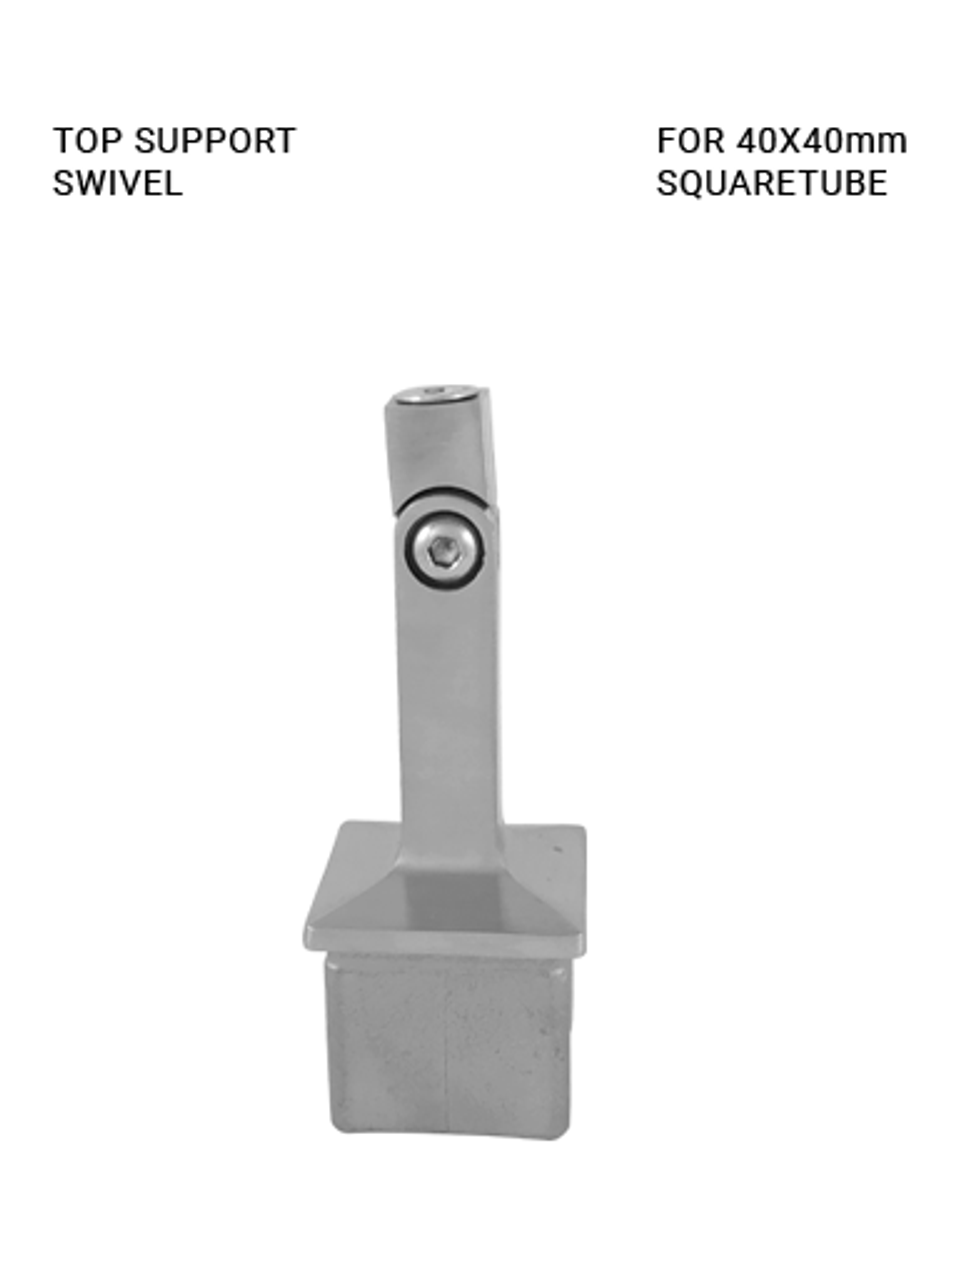 TS448440SWIBL Tube support swivel for 40x40mm square tube